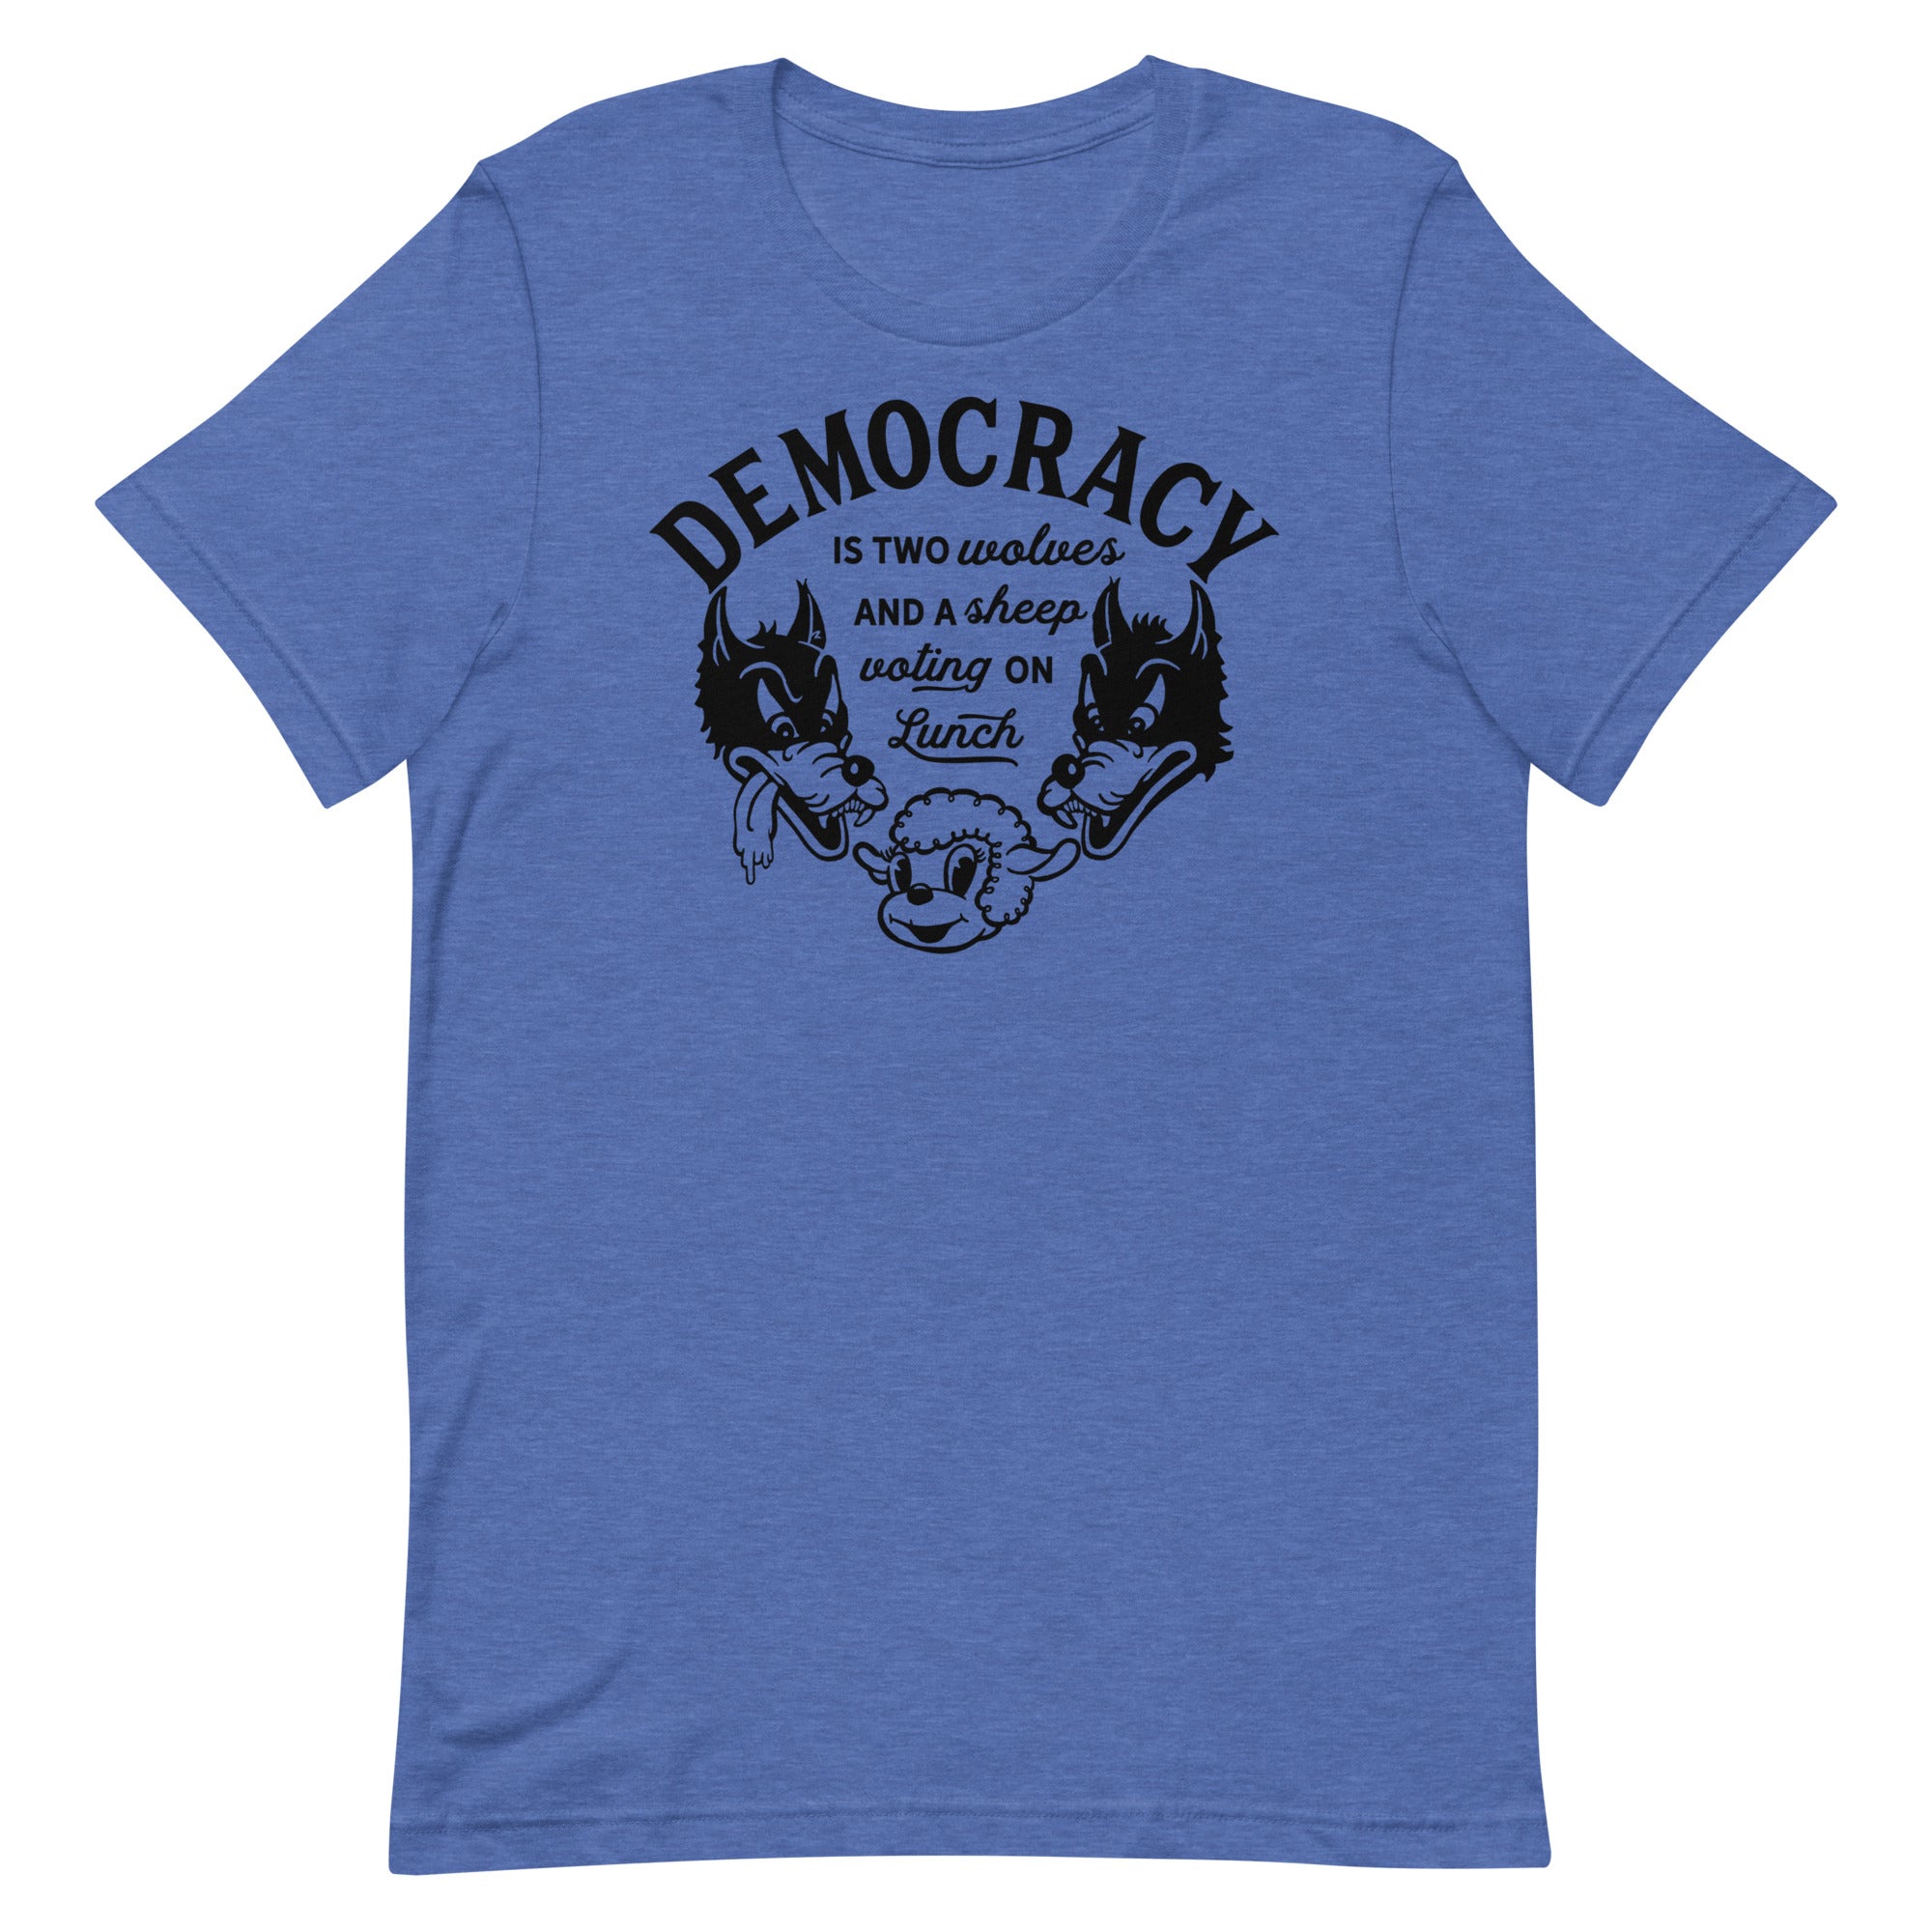 Democracy Two Wolves and a Sheep Voting On Lunch T-Shirt